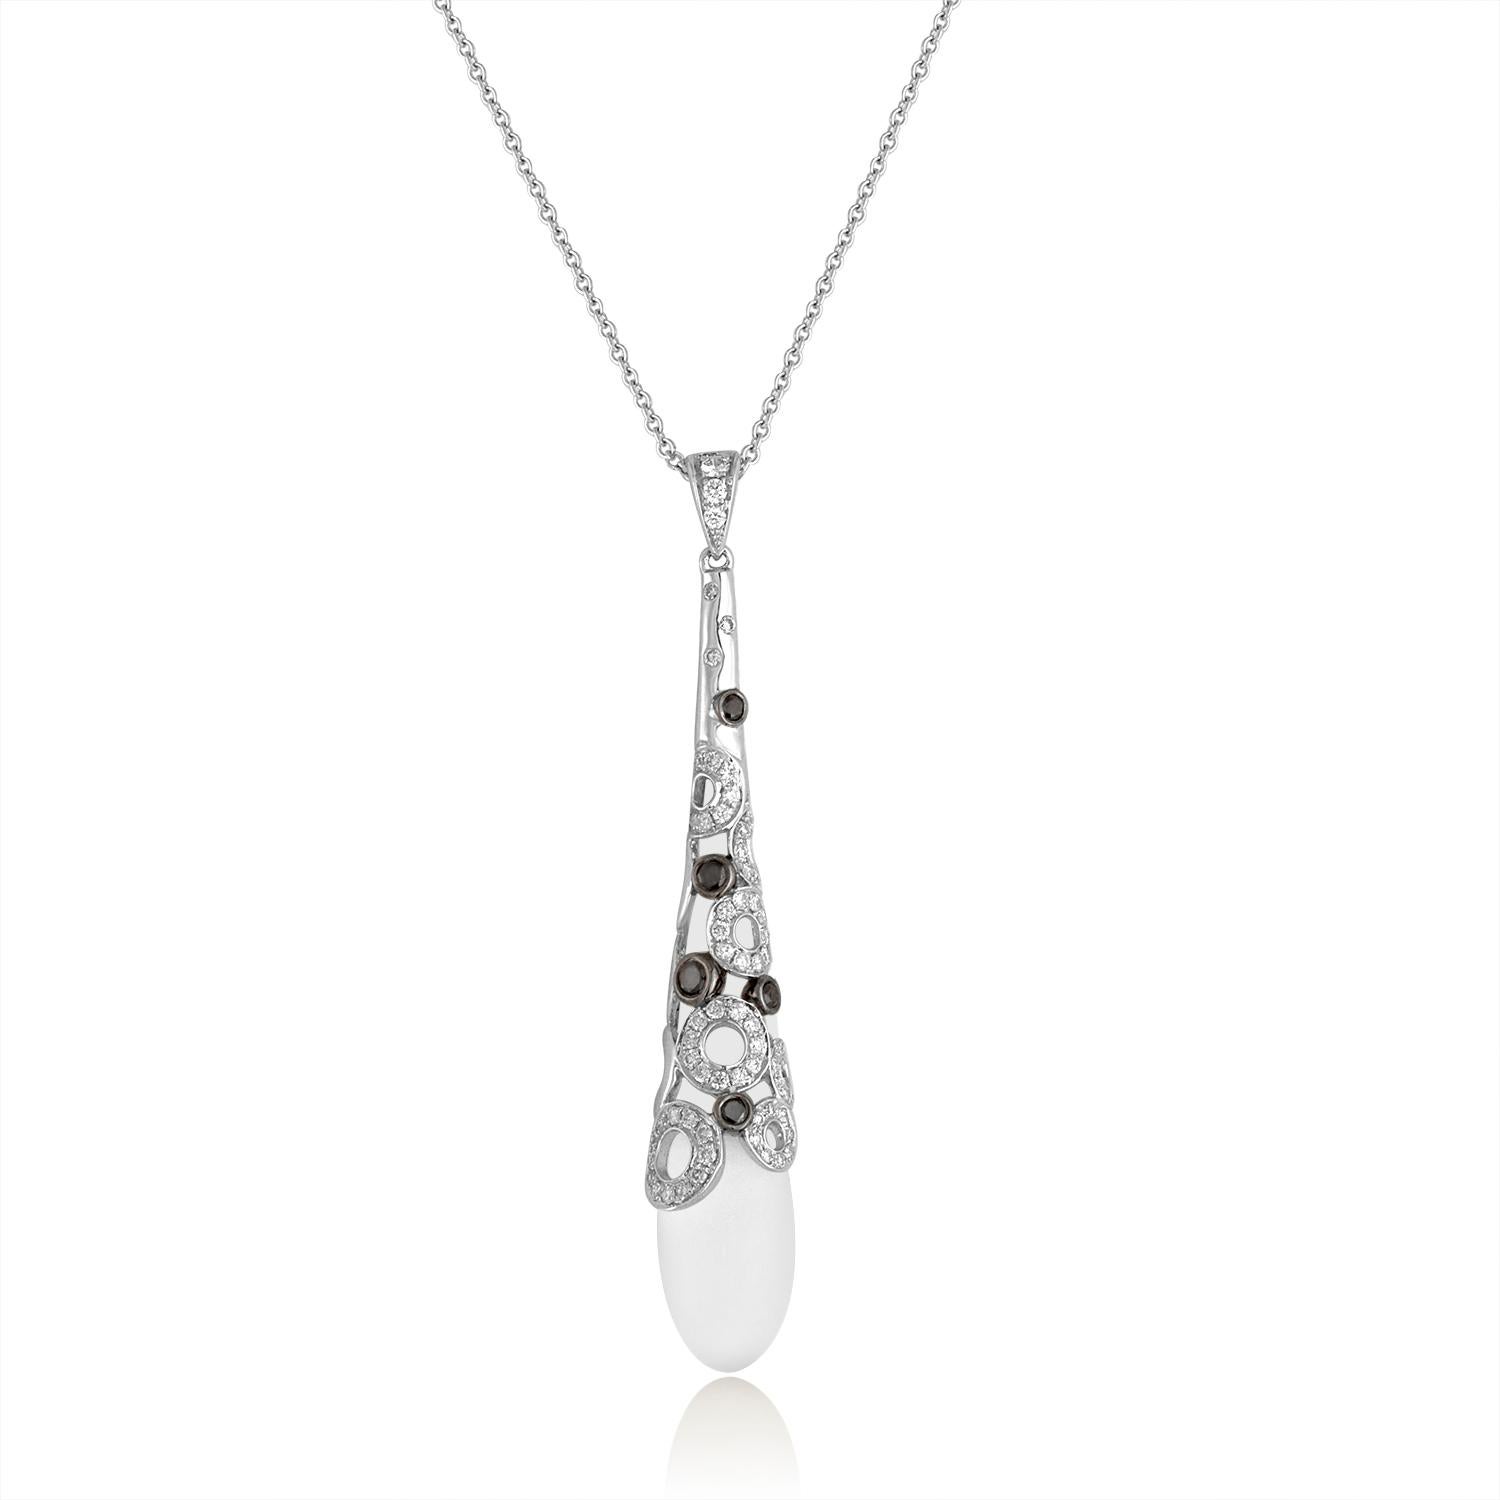 Very Unusual Necklace
The pendant portion is 18K White Gold
The chain is 14K White Gold
Rock Crystal Tear Drop Stone
0.15Ct Black Spinel
0.50Ct in Diamonds G SI
The pendant is 2.25